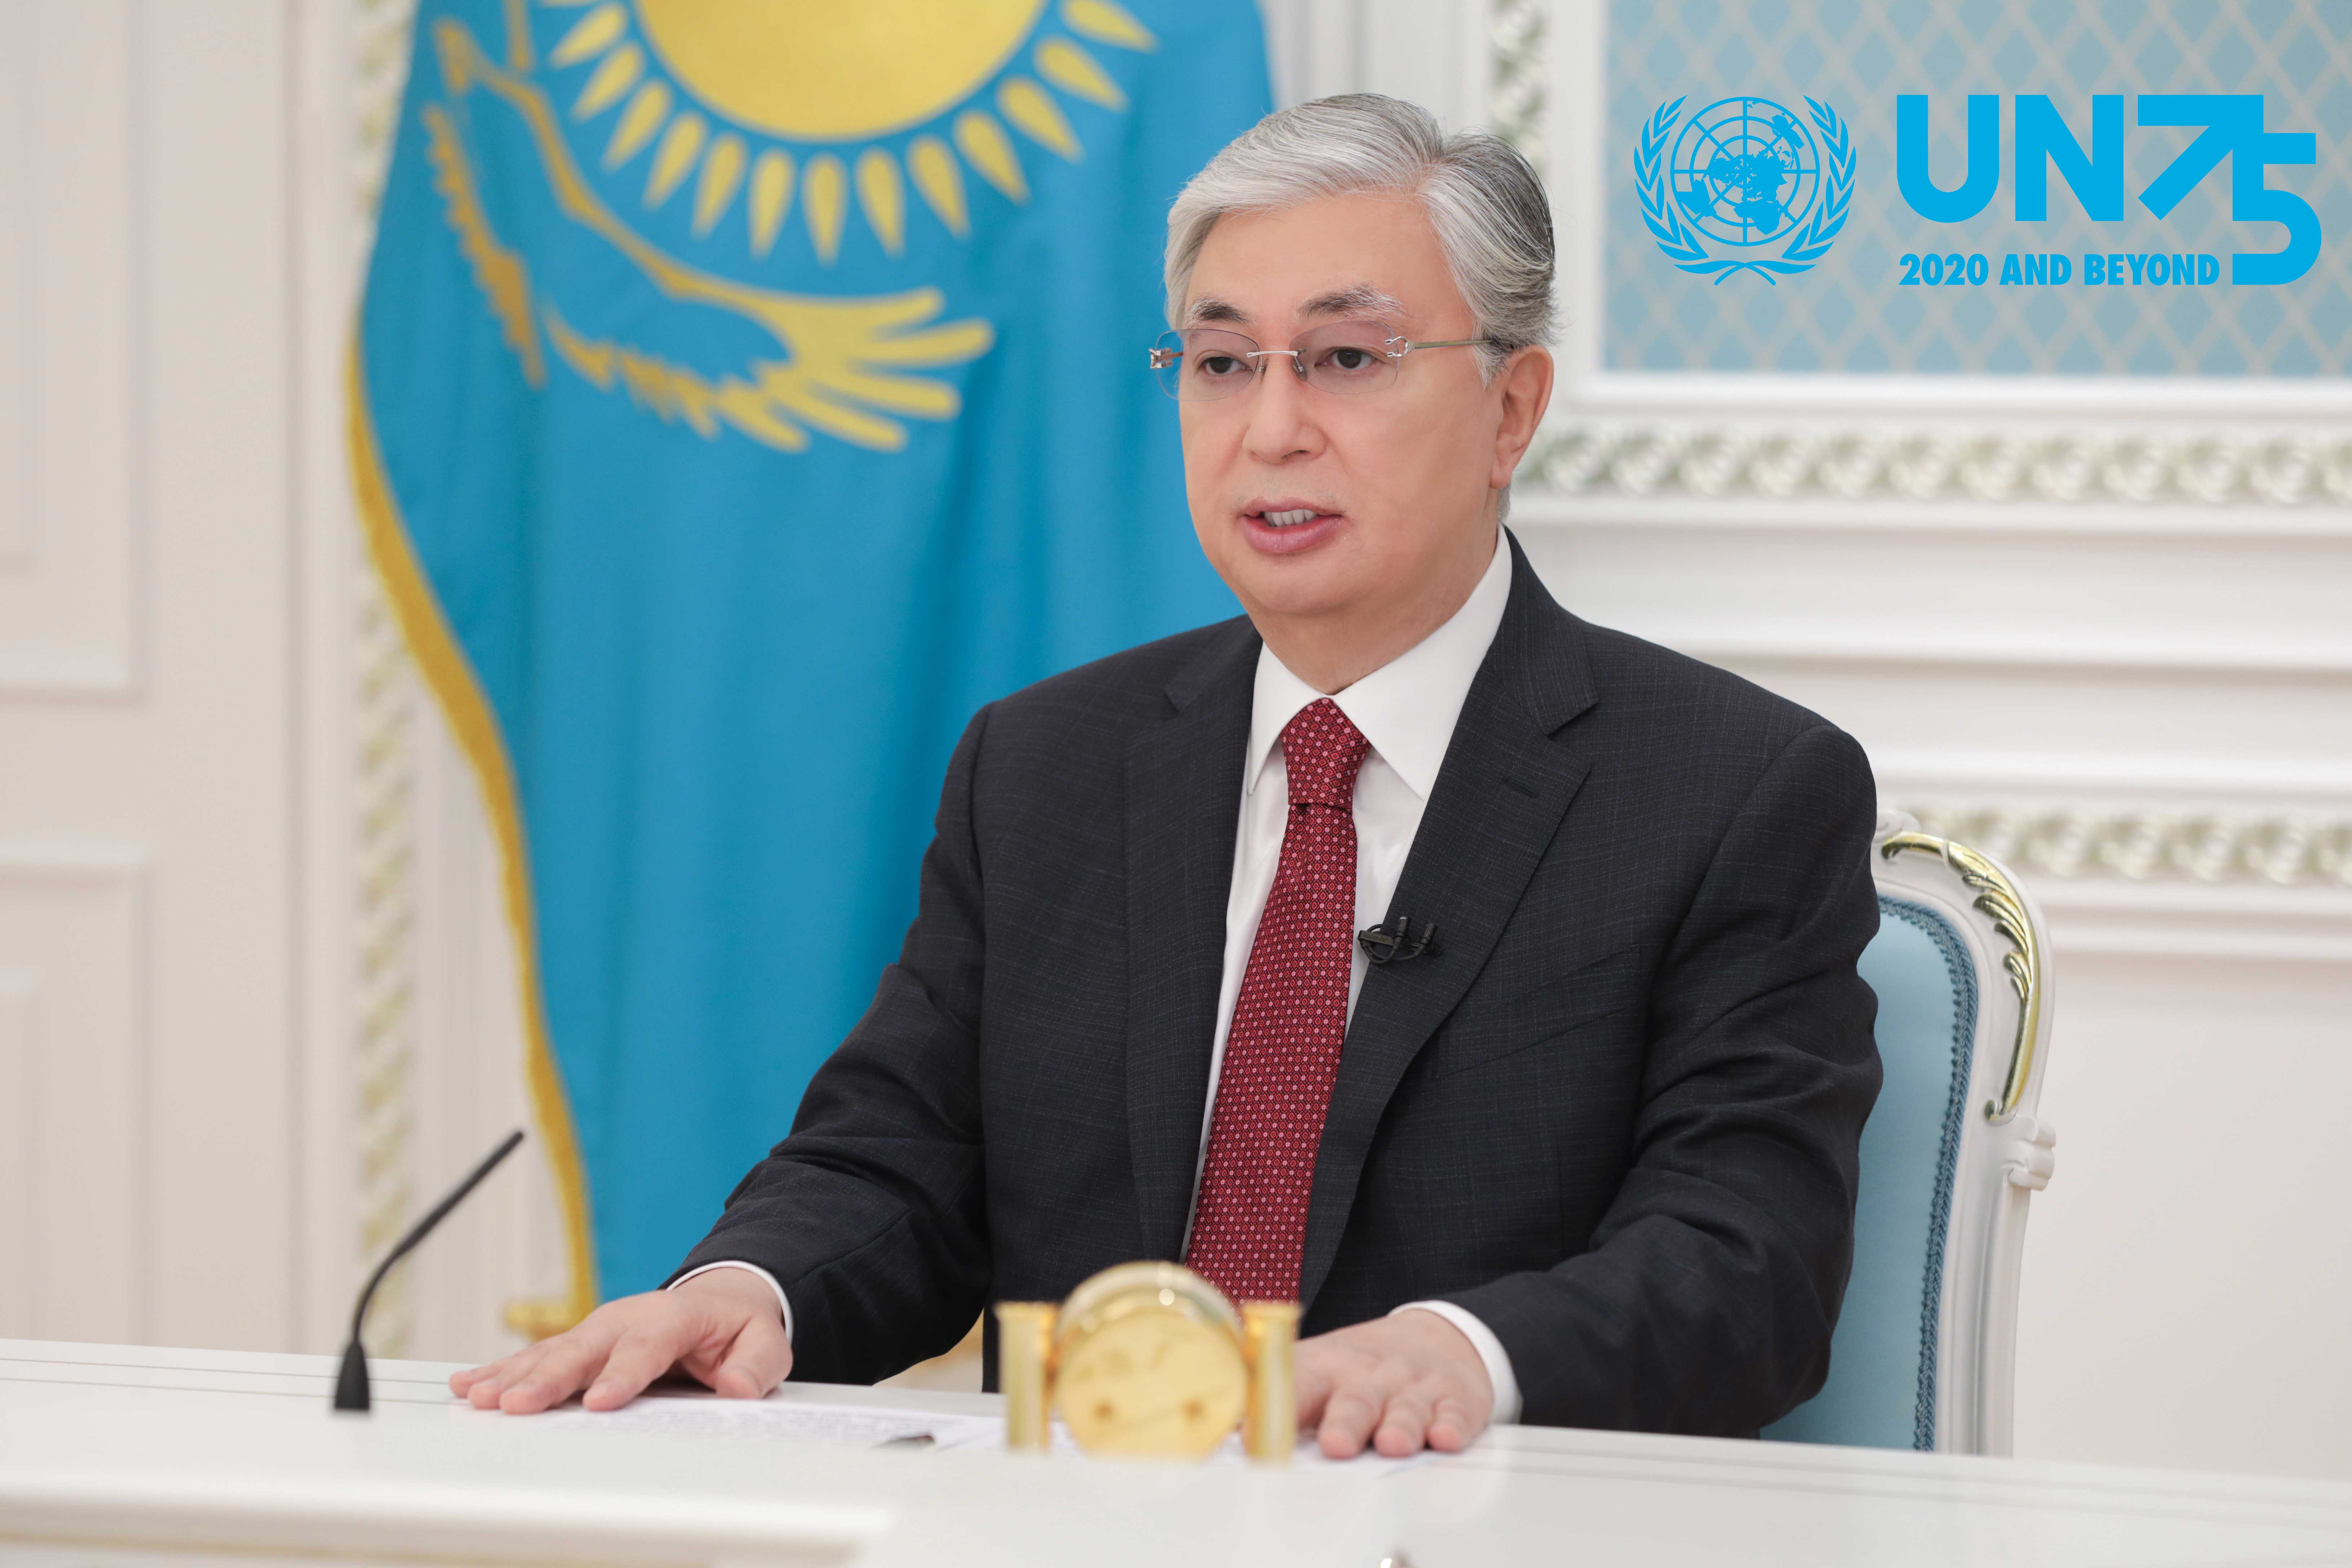 Statement by President of Kazakhstan Kassym-Jomart Tokayev at the General Debate of the 75th session of the UNGA